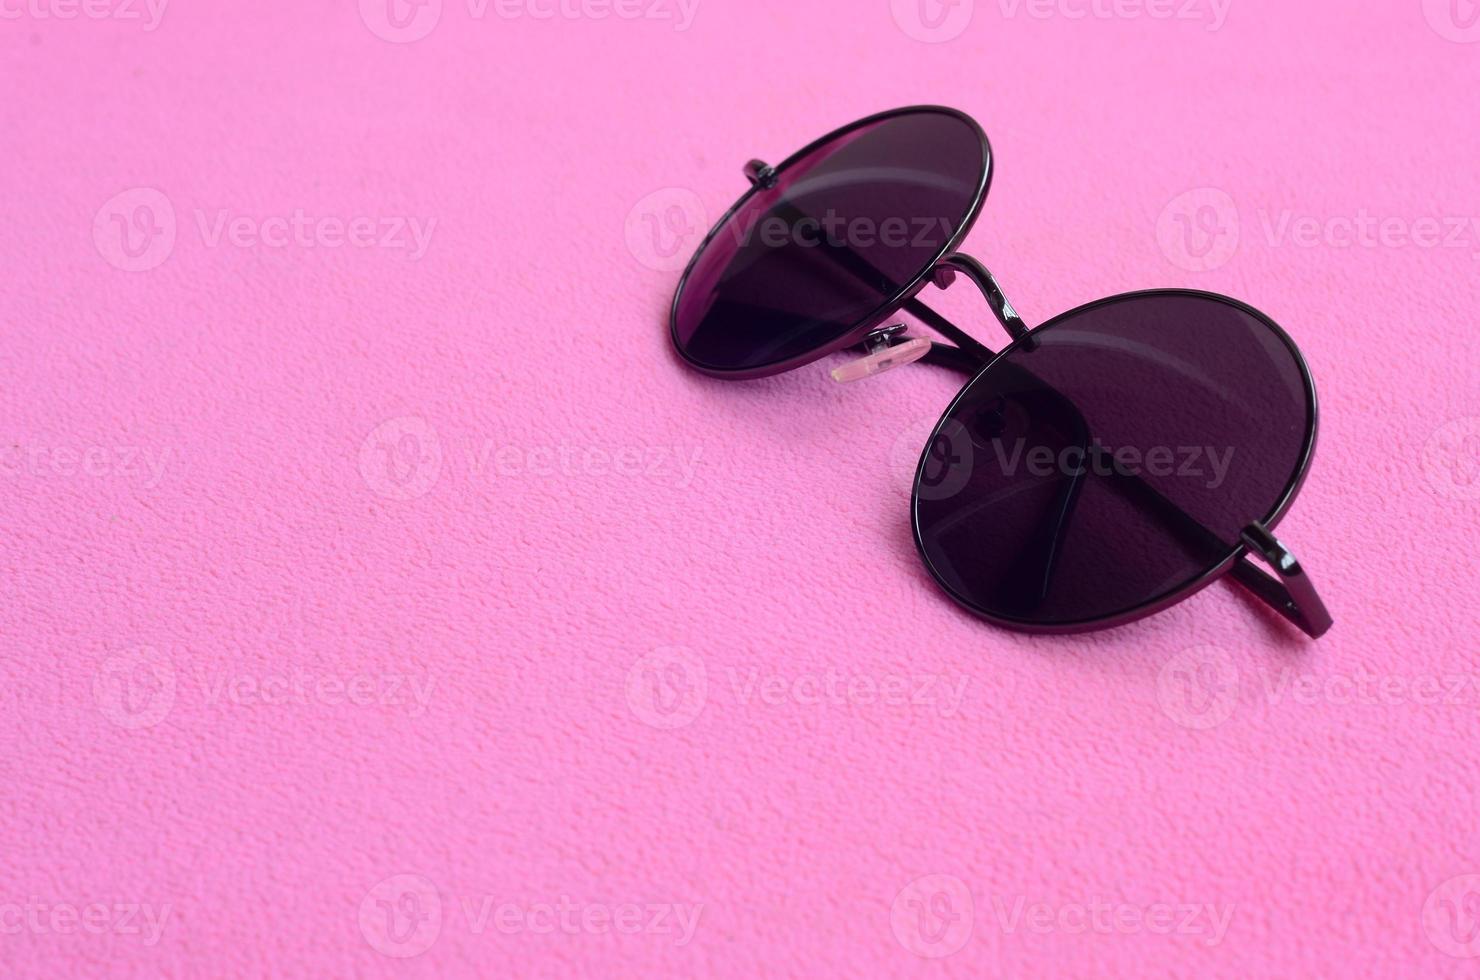 Stylish black sunglasses with round glasses lies on a blanket made of soft and fluffy light pink fleece fabric. Fashionable background picture in female colors photo